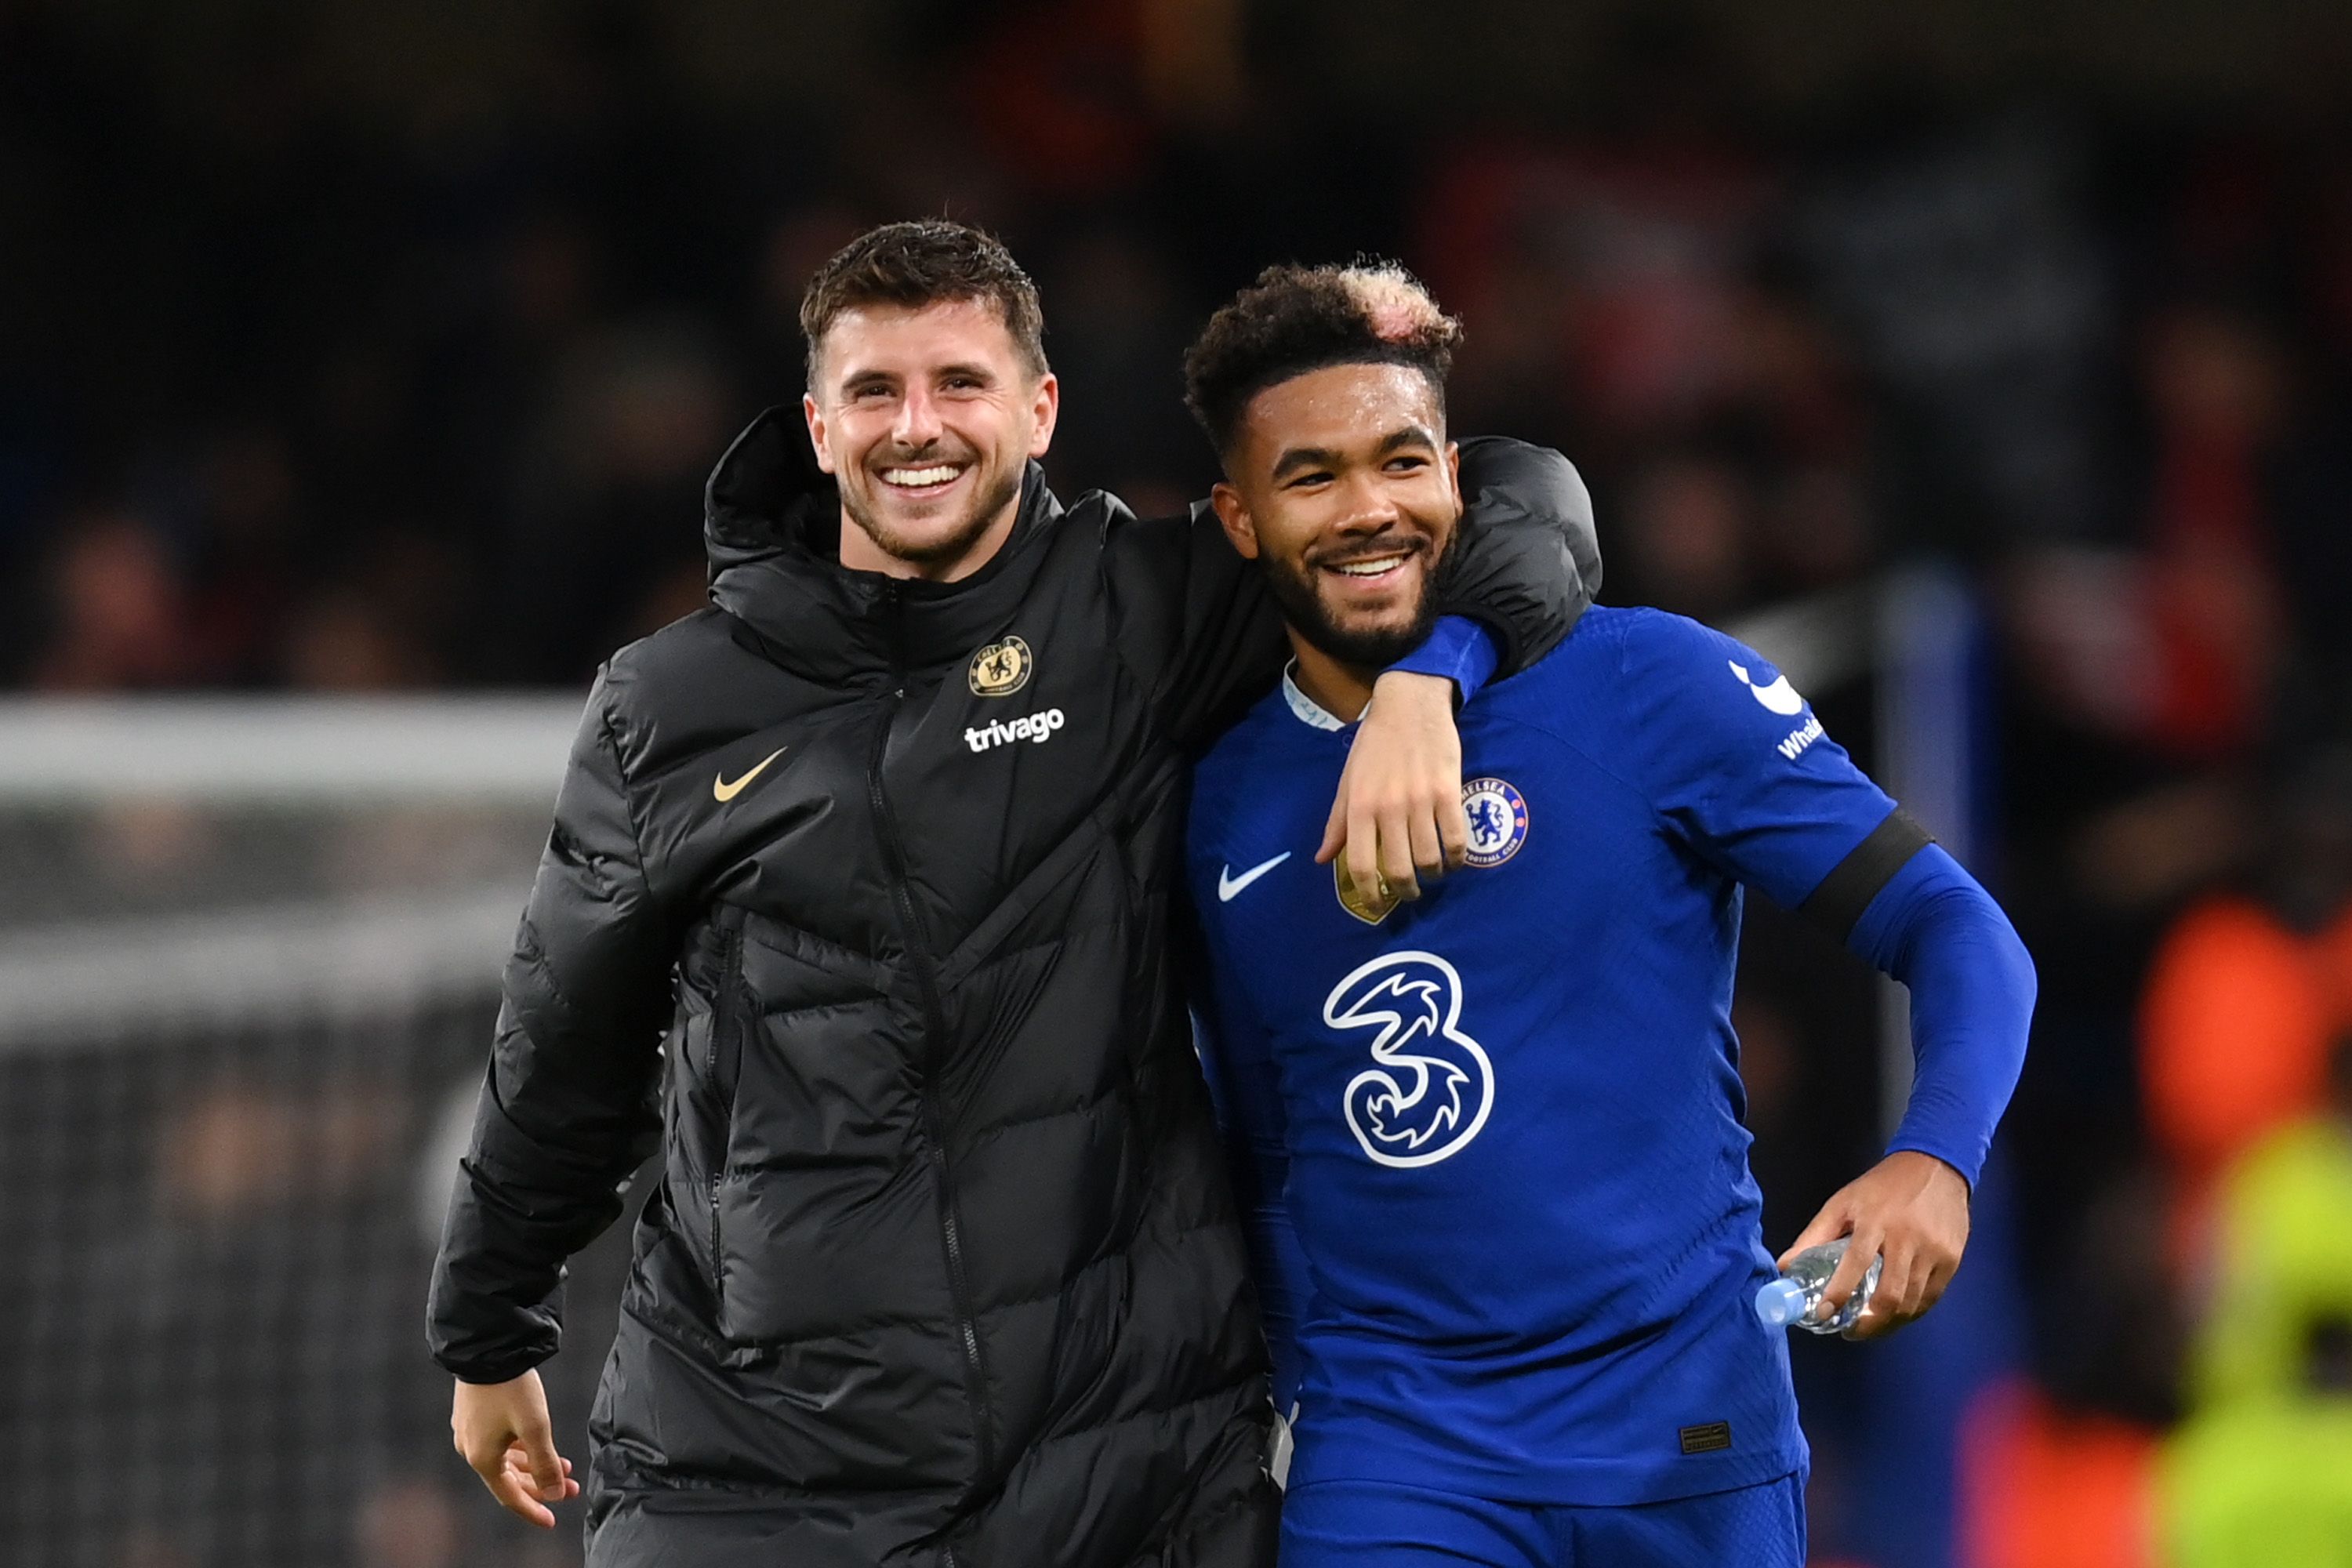 Mason Mount and Reece James celebrate Chelsea victory